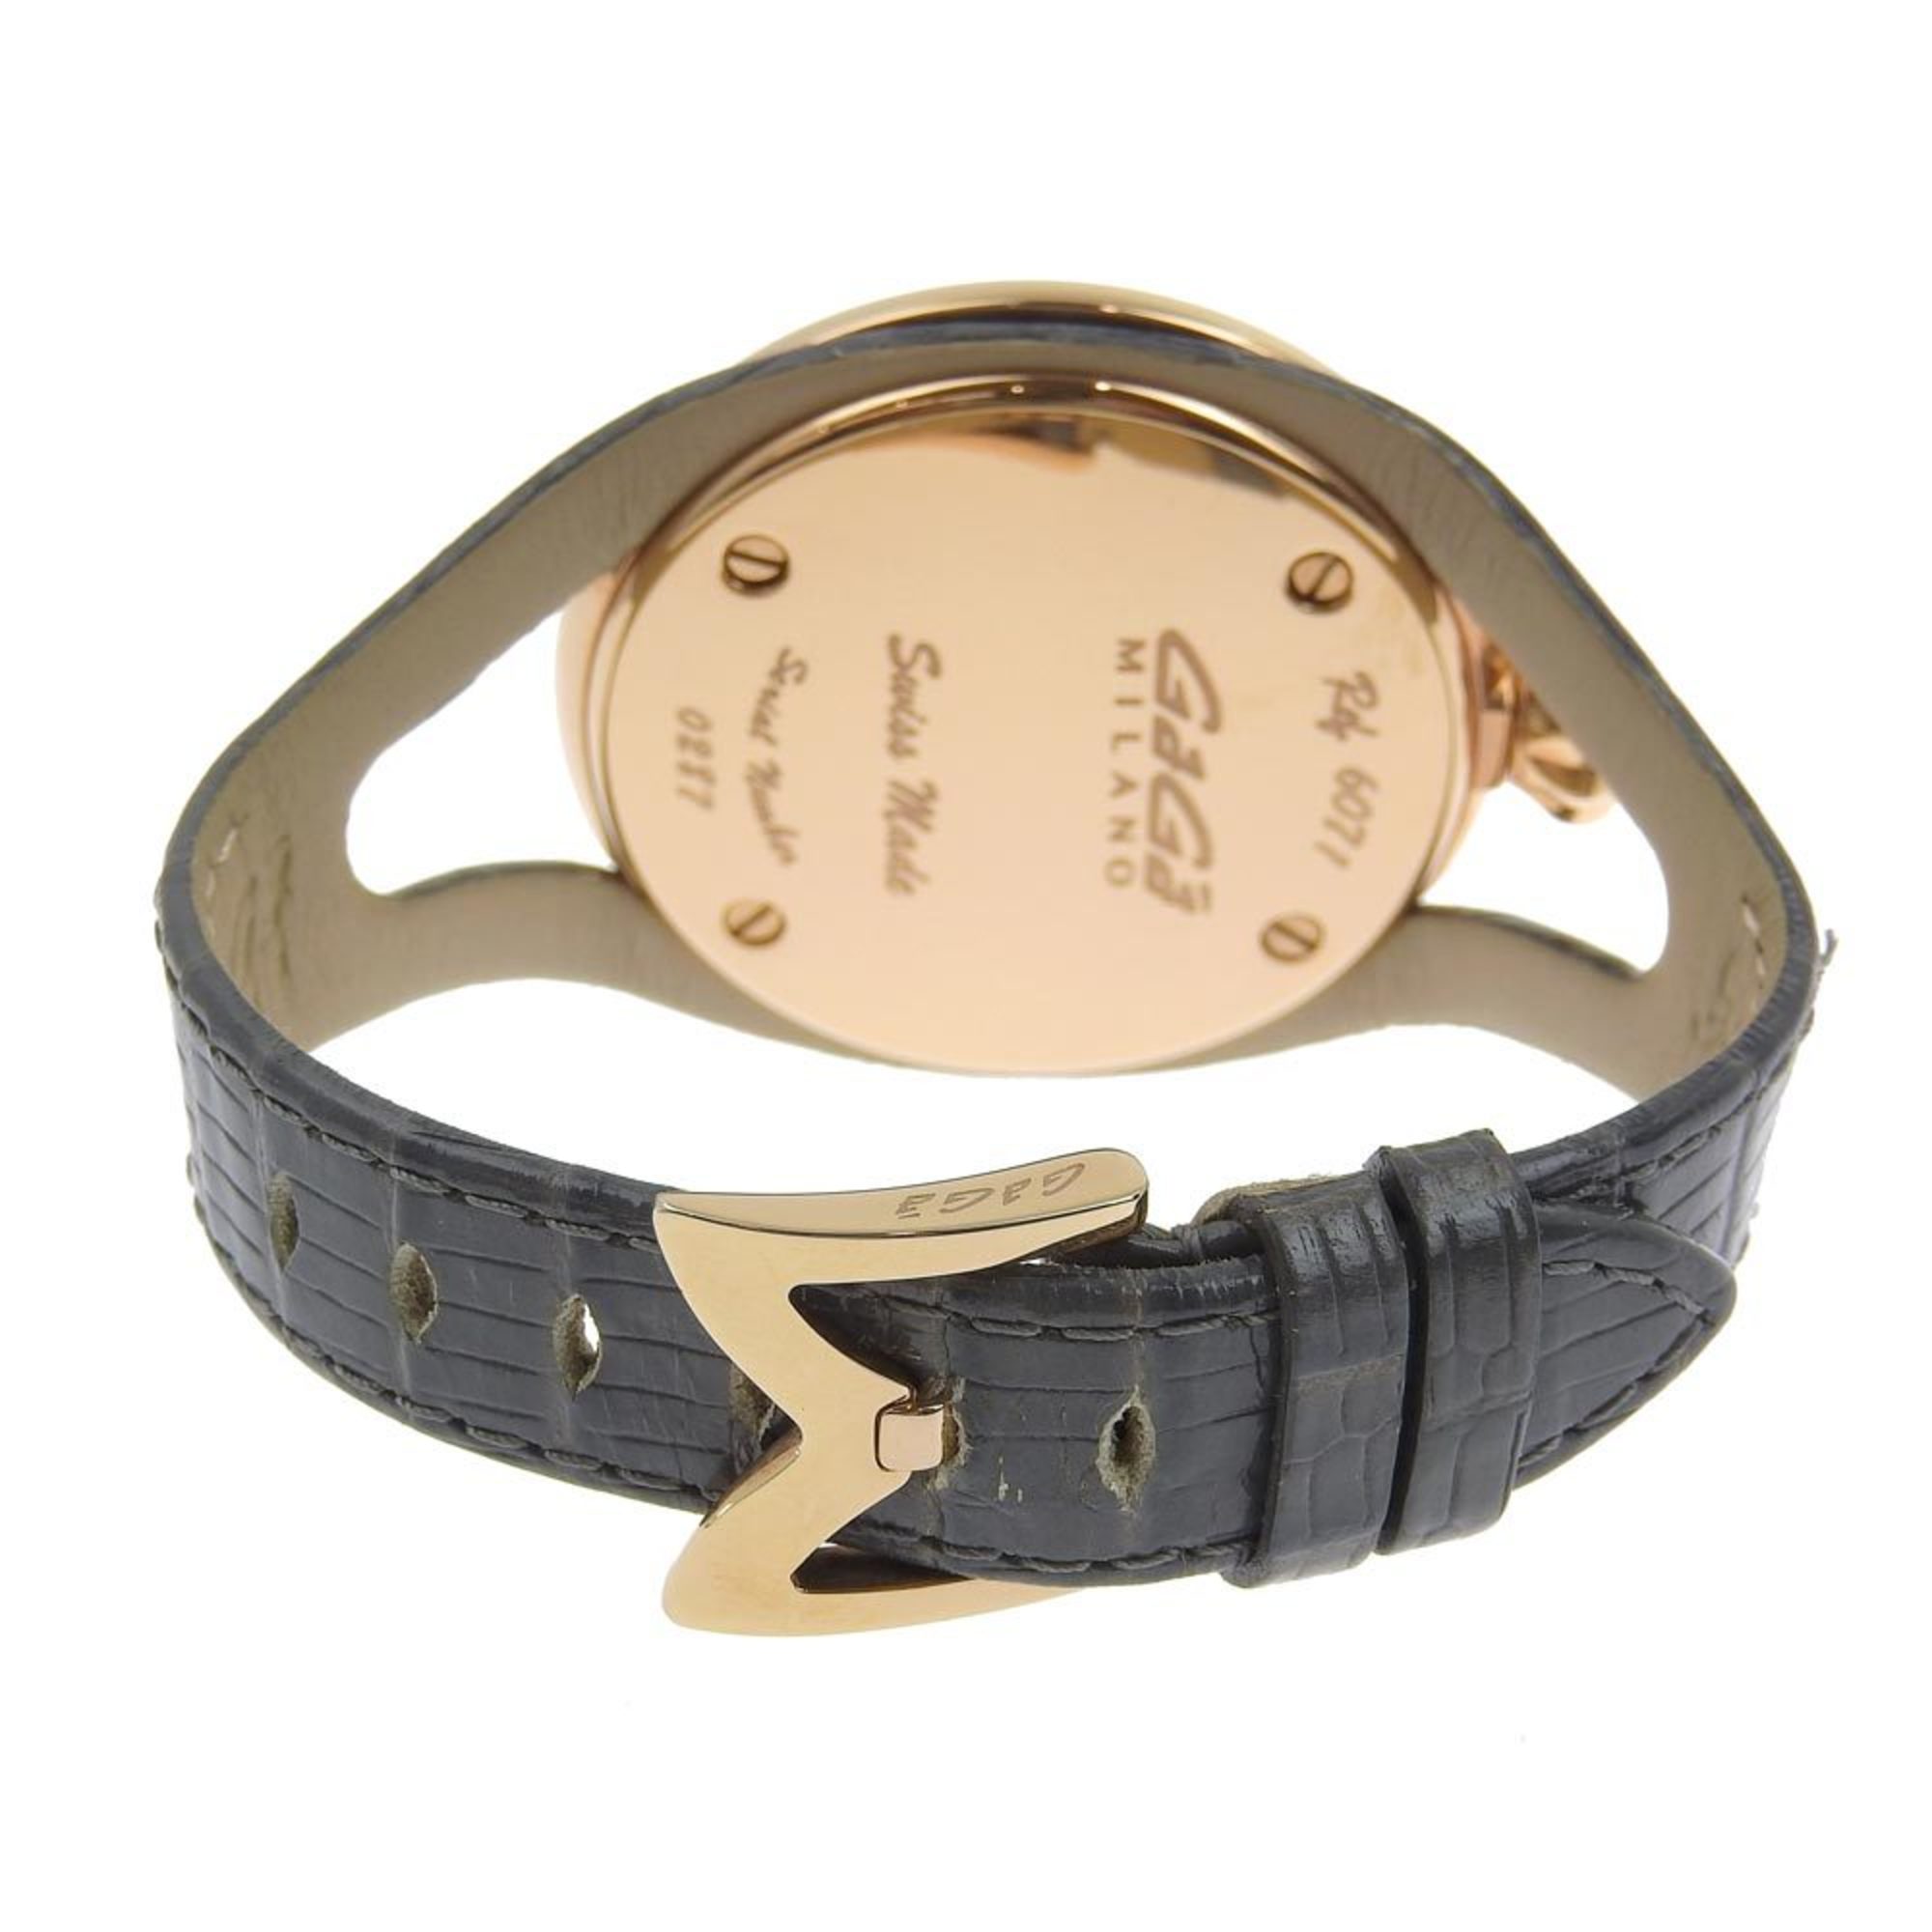 Gaga Milano Flat 42 Watch 6071 Stainless Steel x Gold Plated Leather Quartz Analog Display Black Shell Dial Unisex